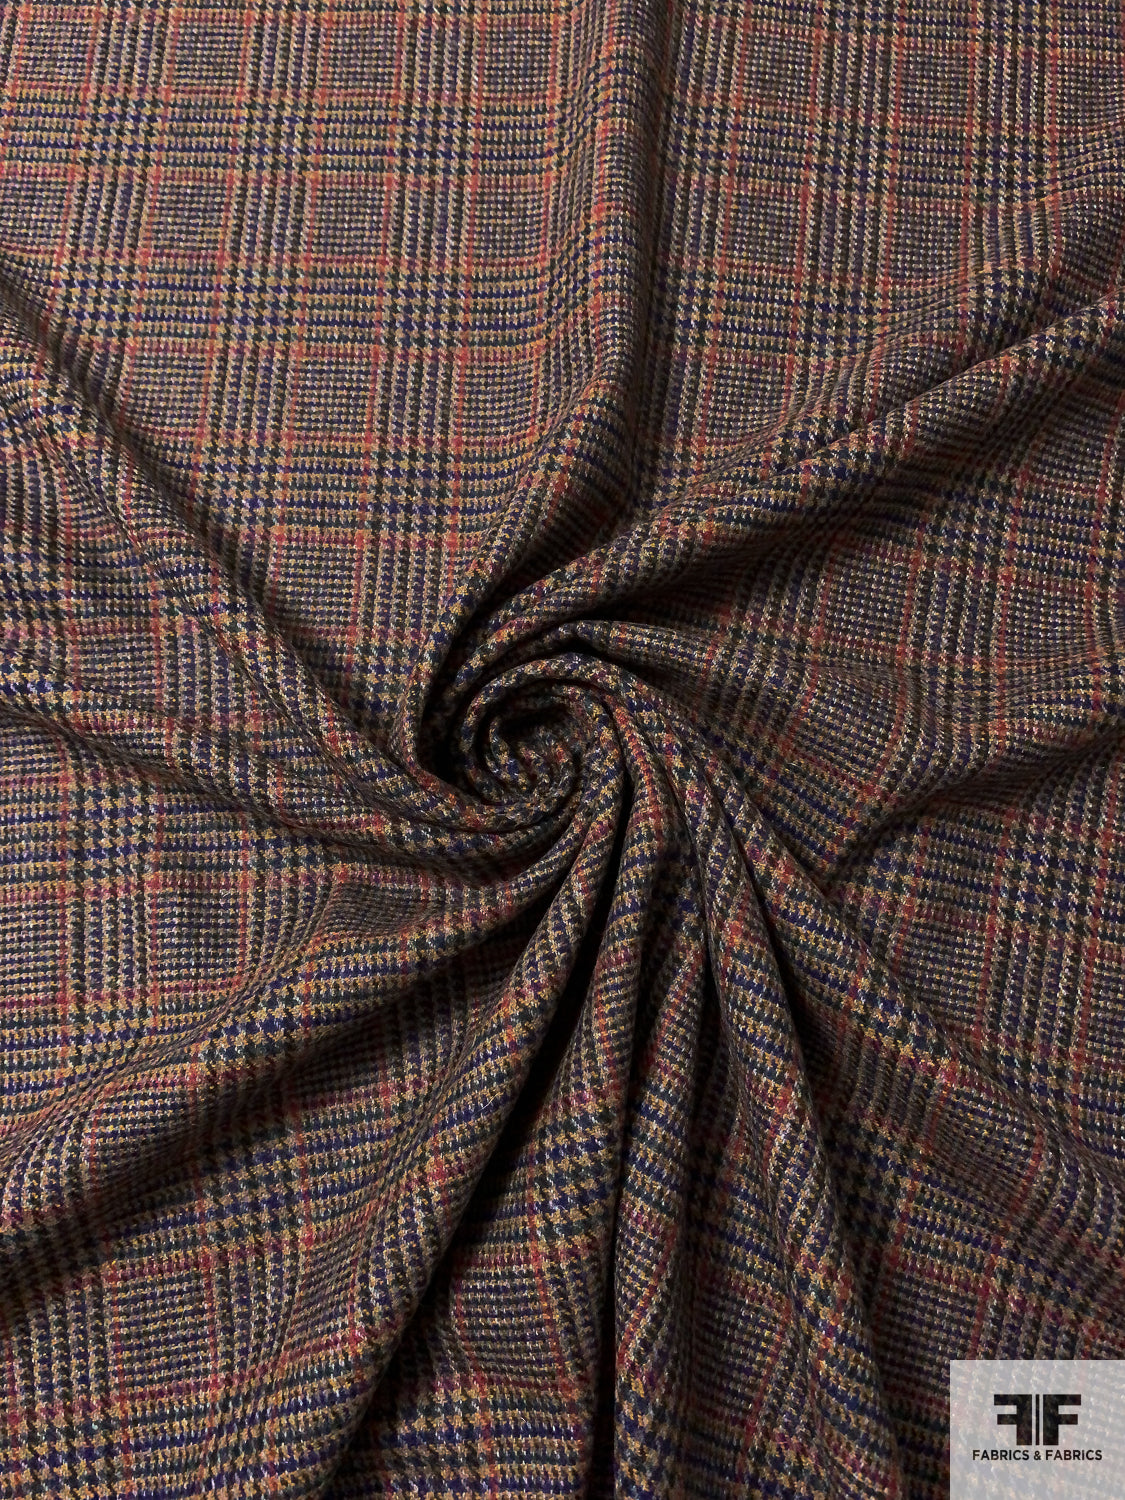 Made in England Glen Plaid Lambswool Suiting - Tan / Maroon / Black / Navy / Evergreen